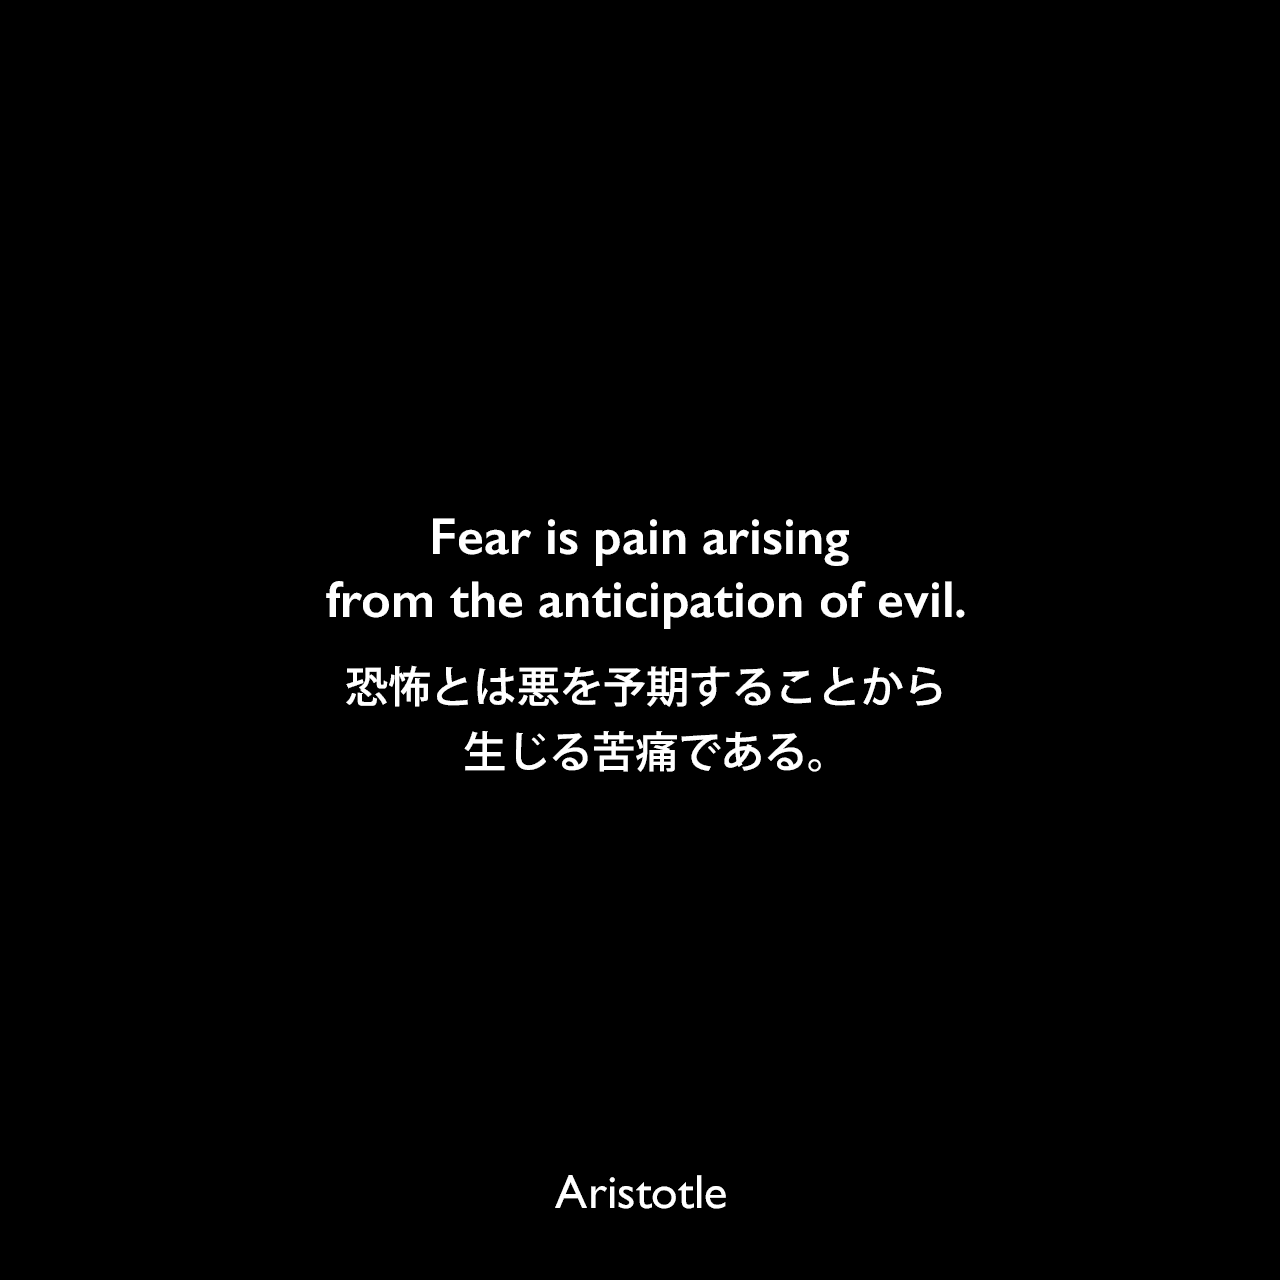 Fear is pain arising from the anticipation of evil.恐怖とは悪を予期することから生じる苦痛である。Aristotle